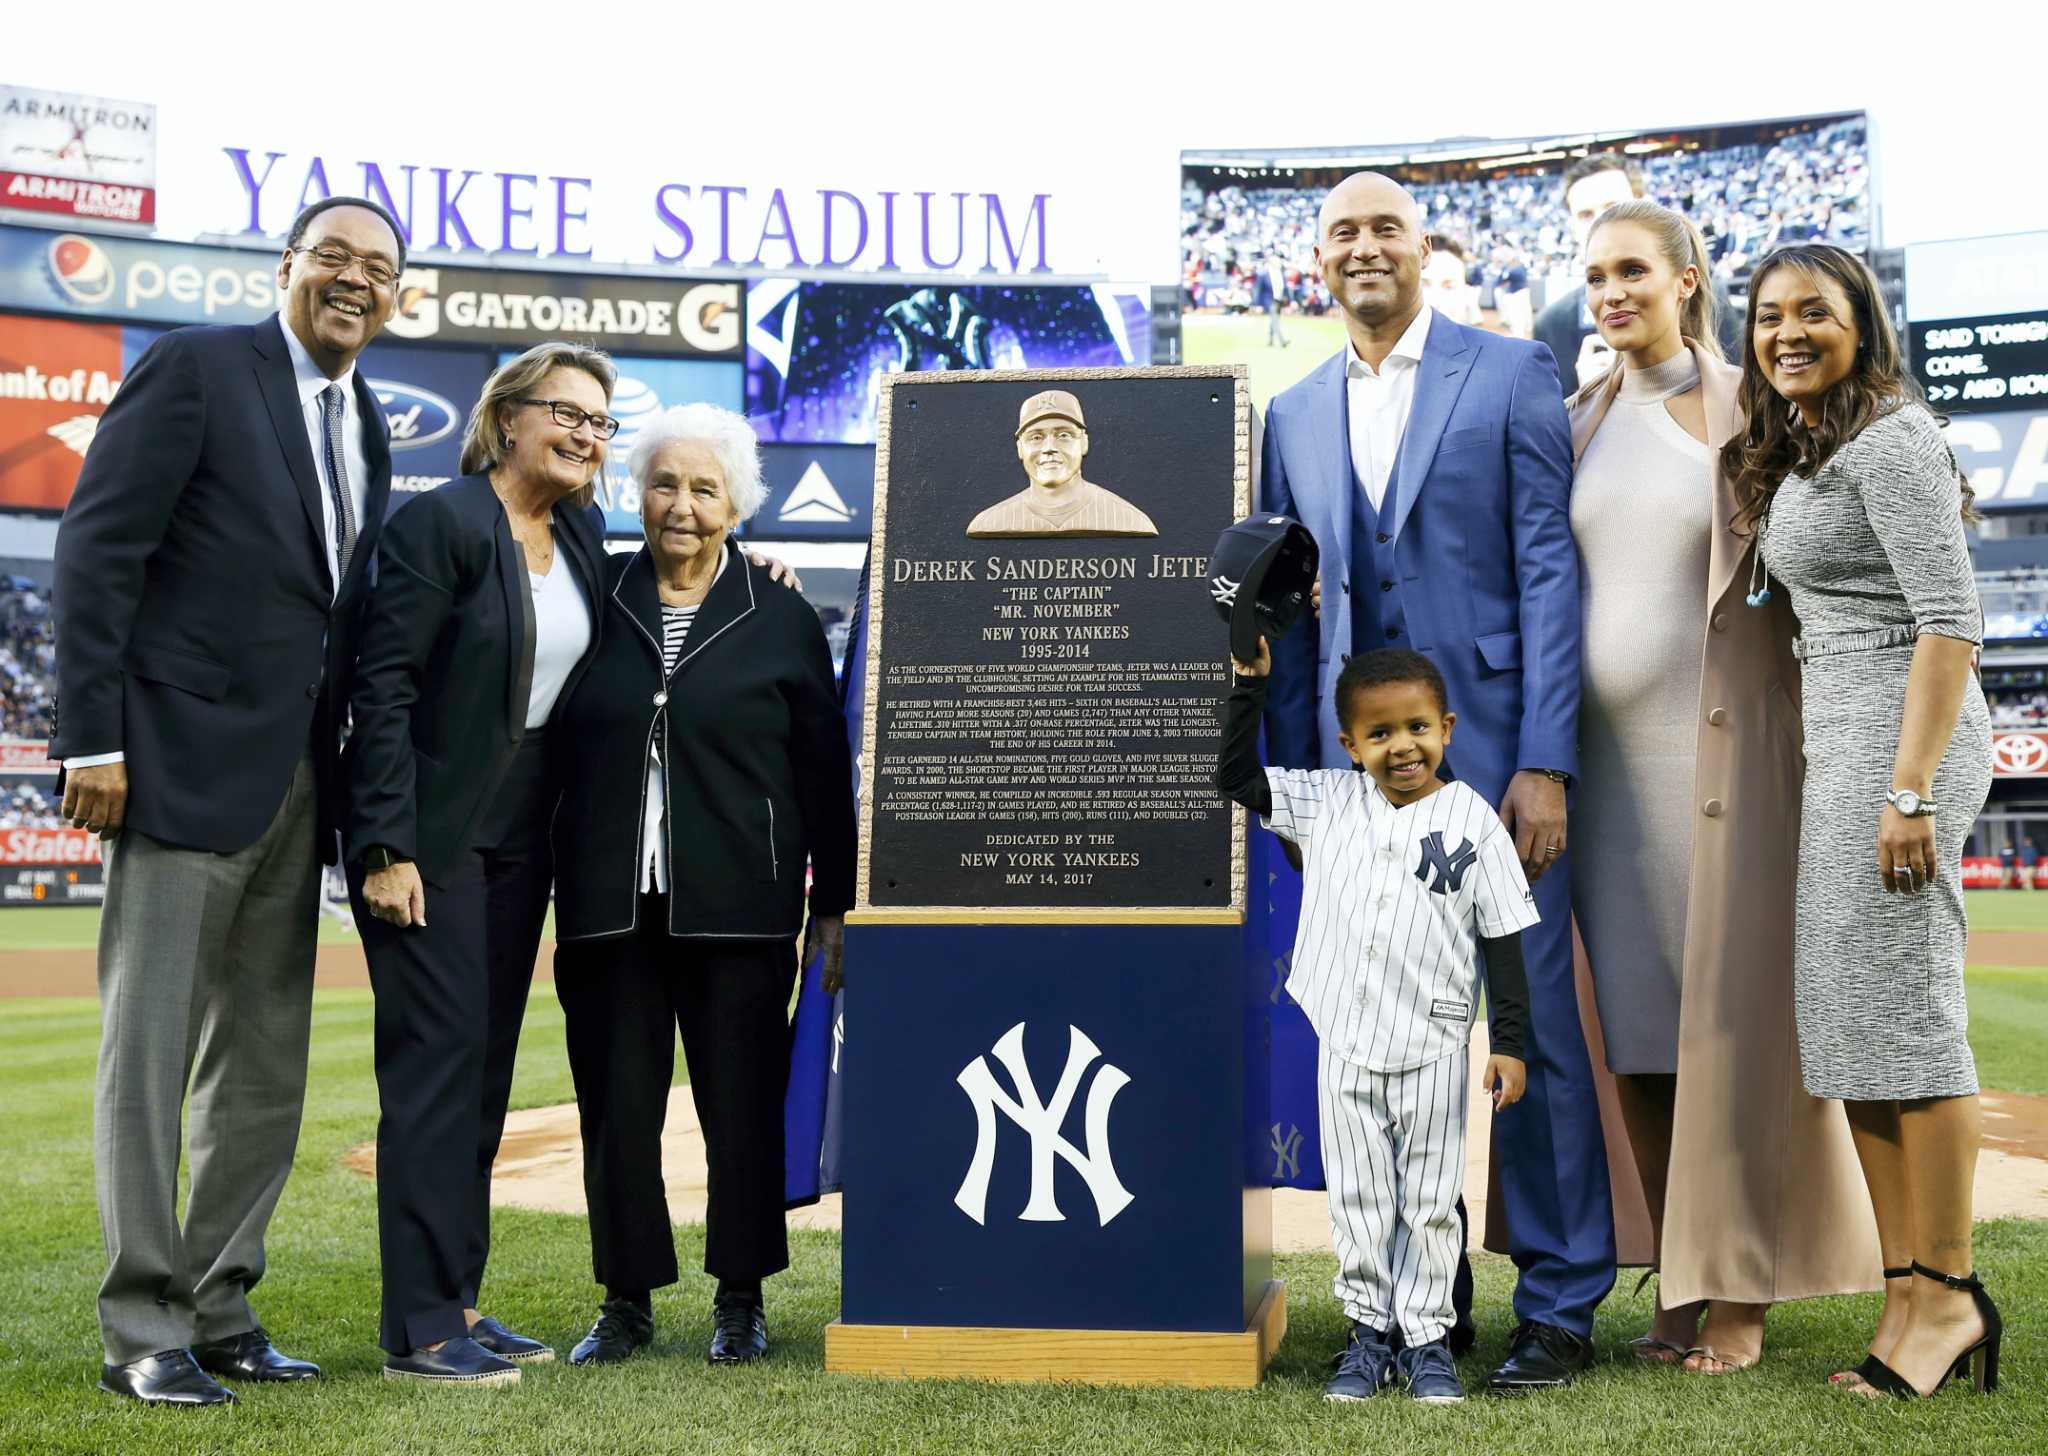 Buck Showalter reflects on Derek Jeter's career before his final home game